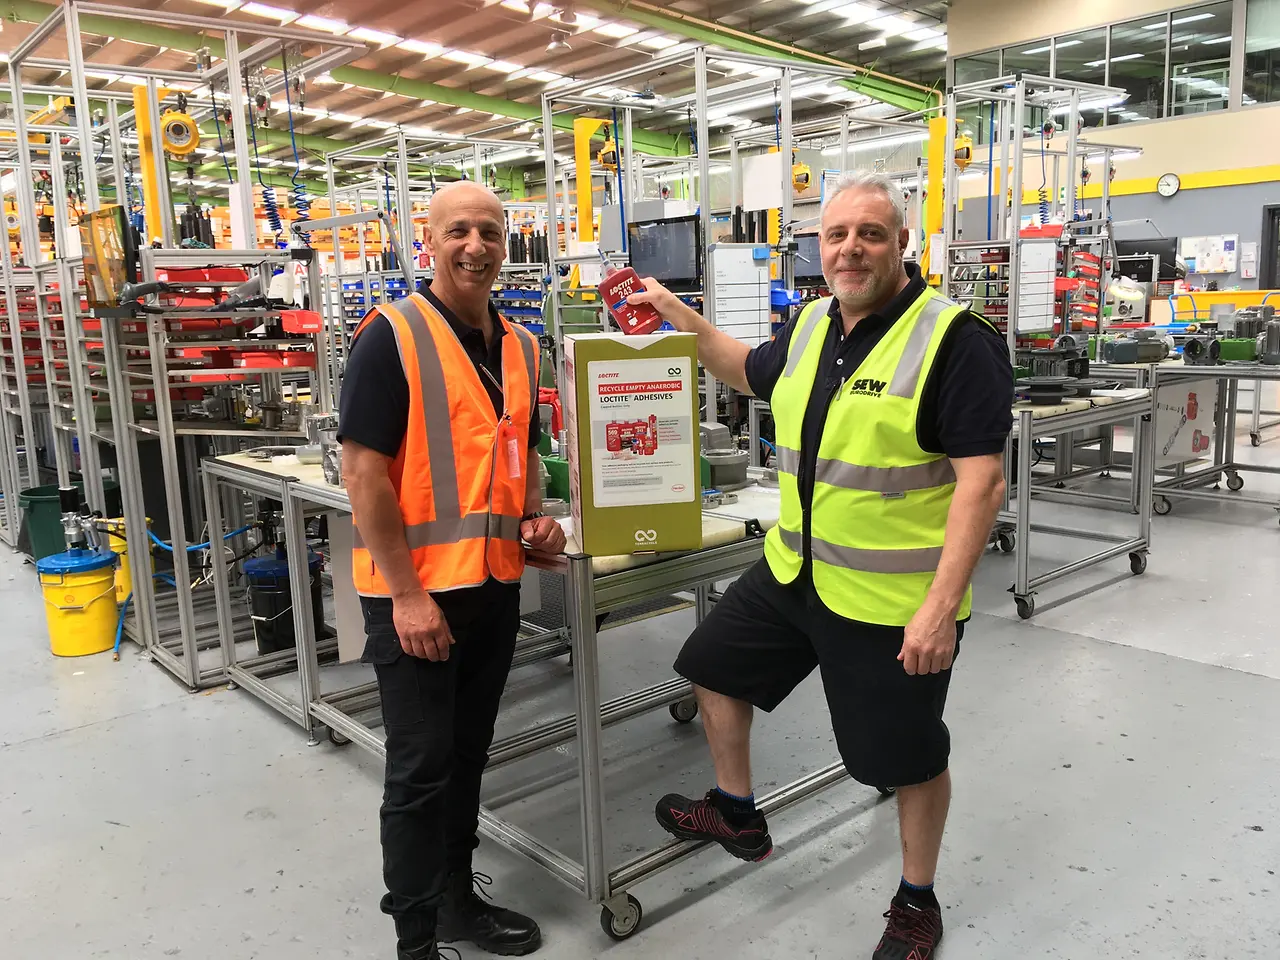 SEW-EURODRIVE Pty. Ltd. is one of our customers which participates in and supports Henkel’s Adhesive Recycling Program as it is aligned with their focus on sustainability.